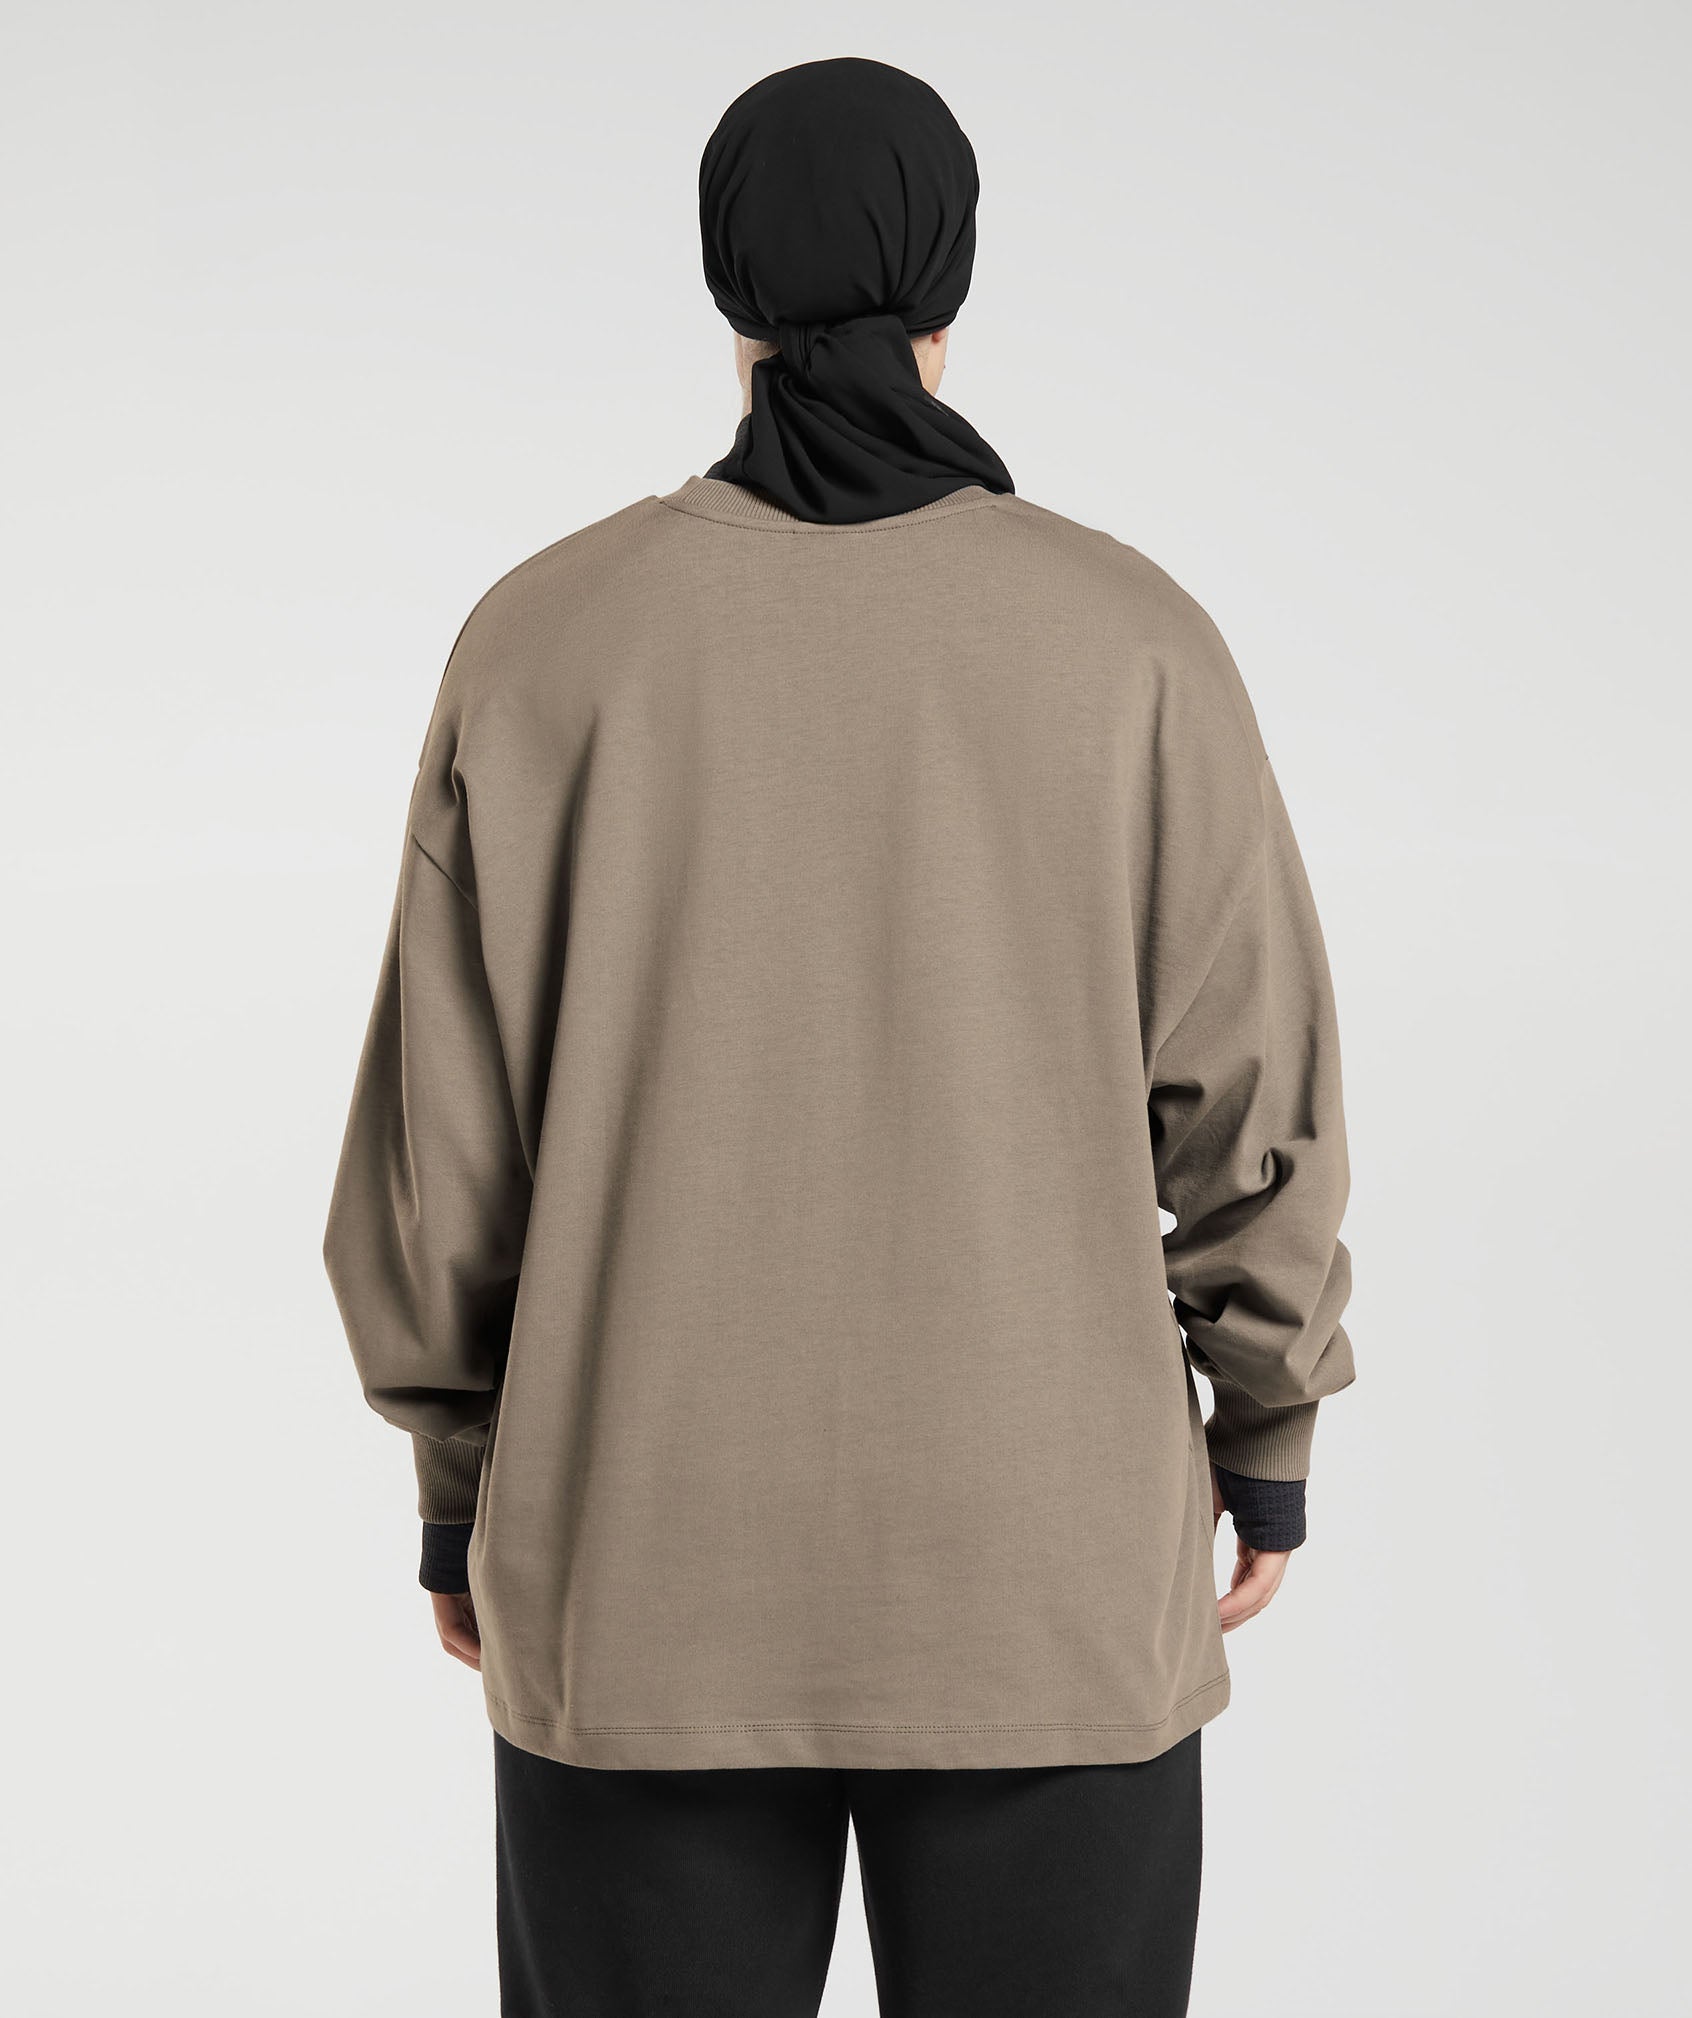 GS X Leana Deeb Oversized Long Sleeve Top in Brushed Brown - view 2